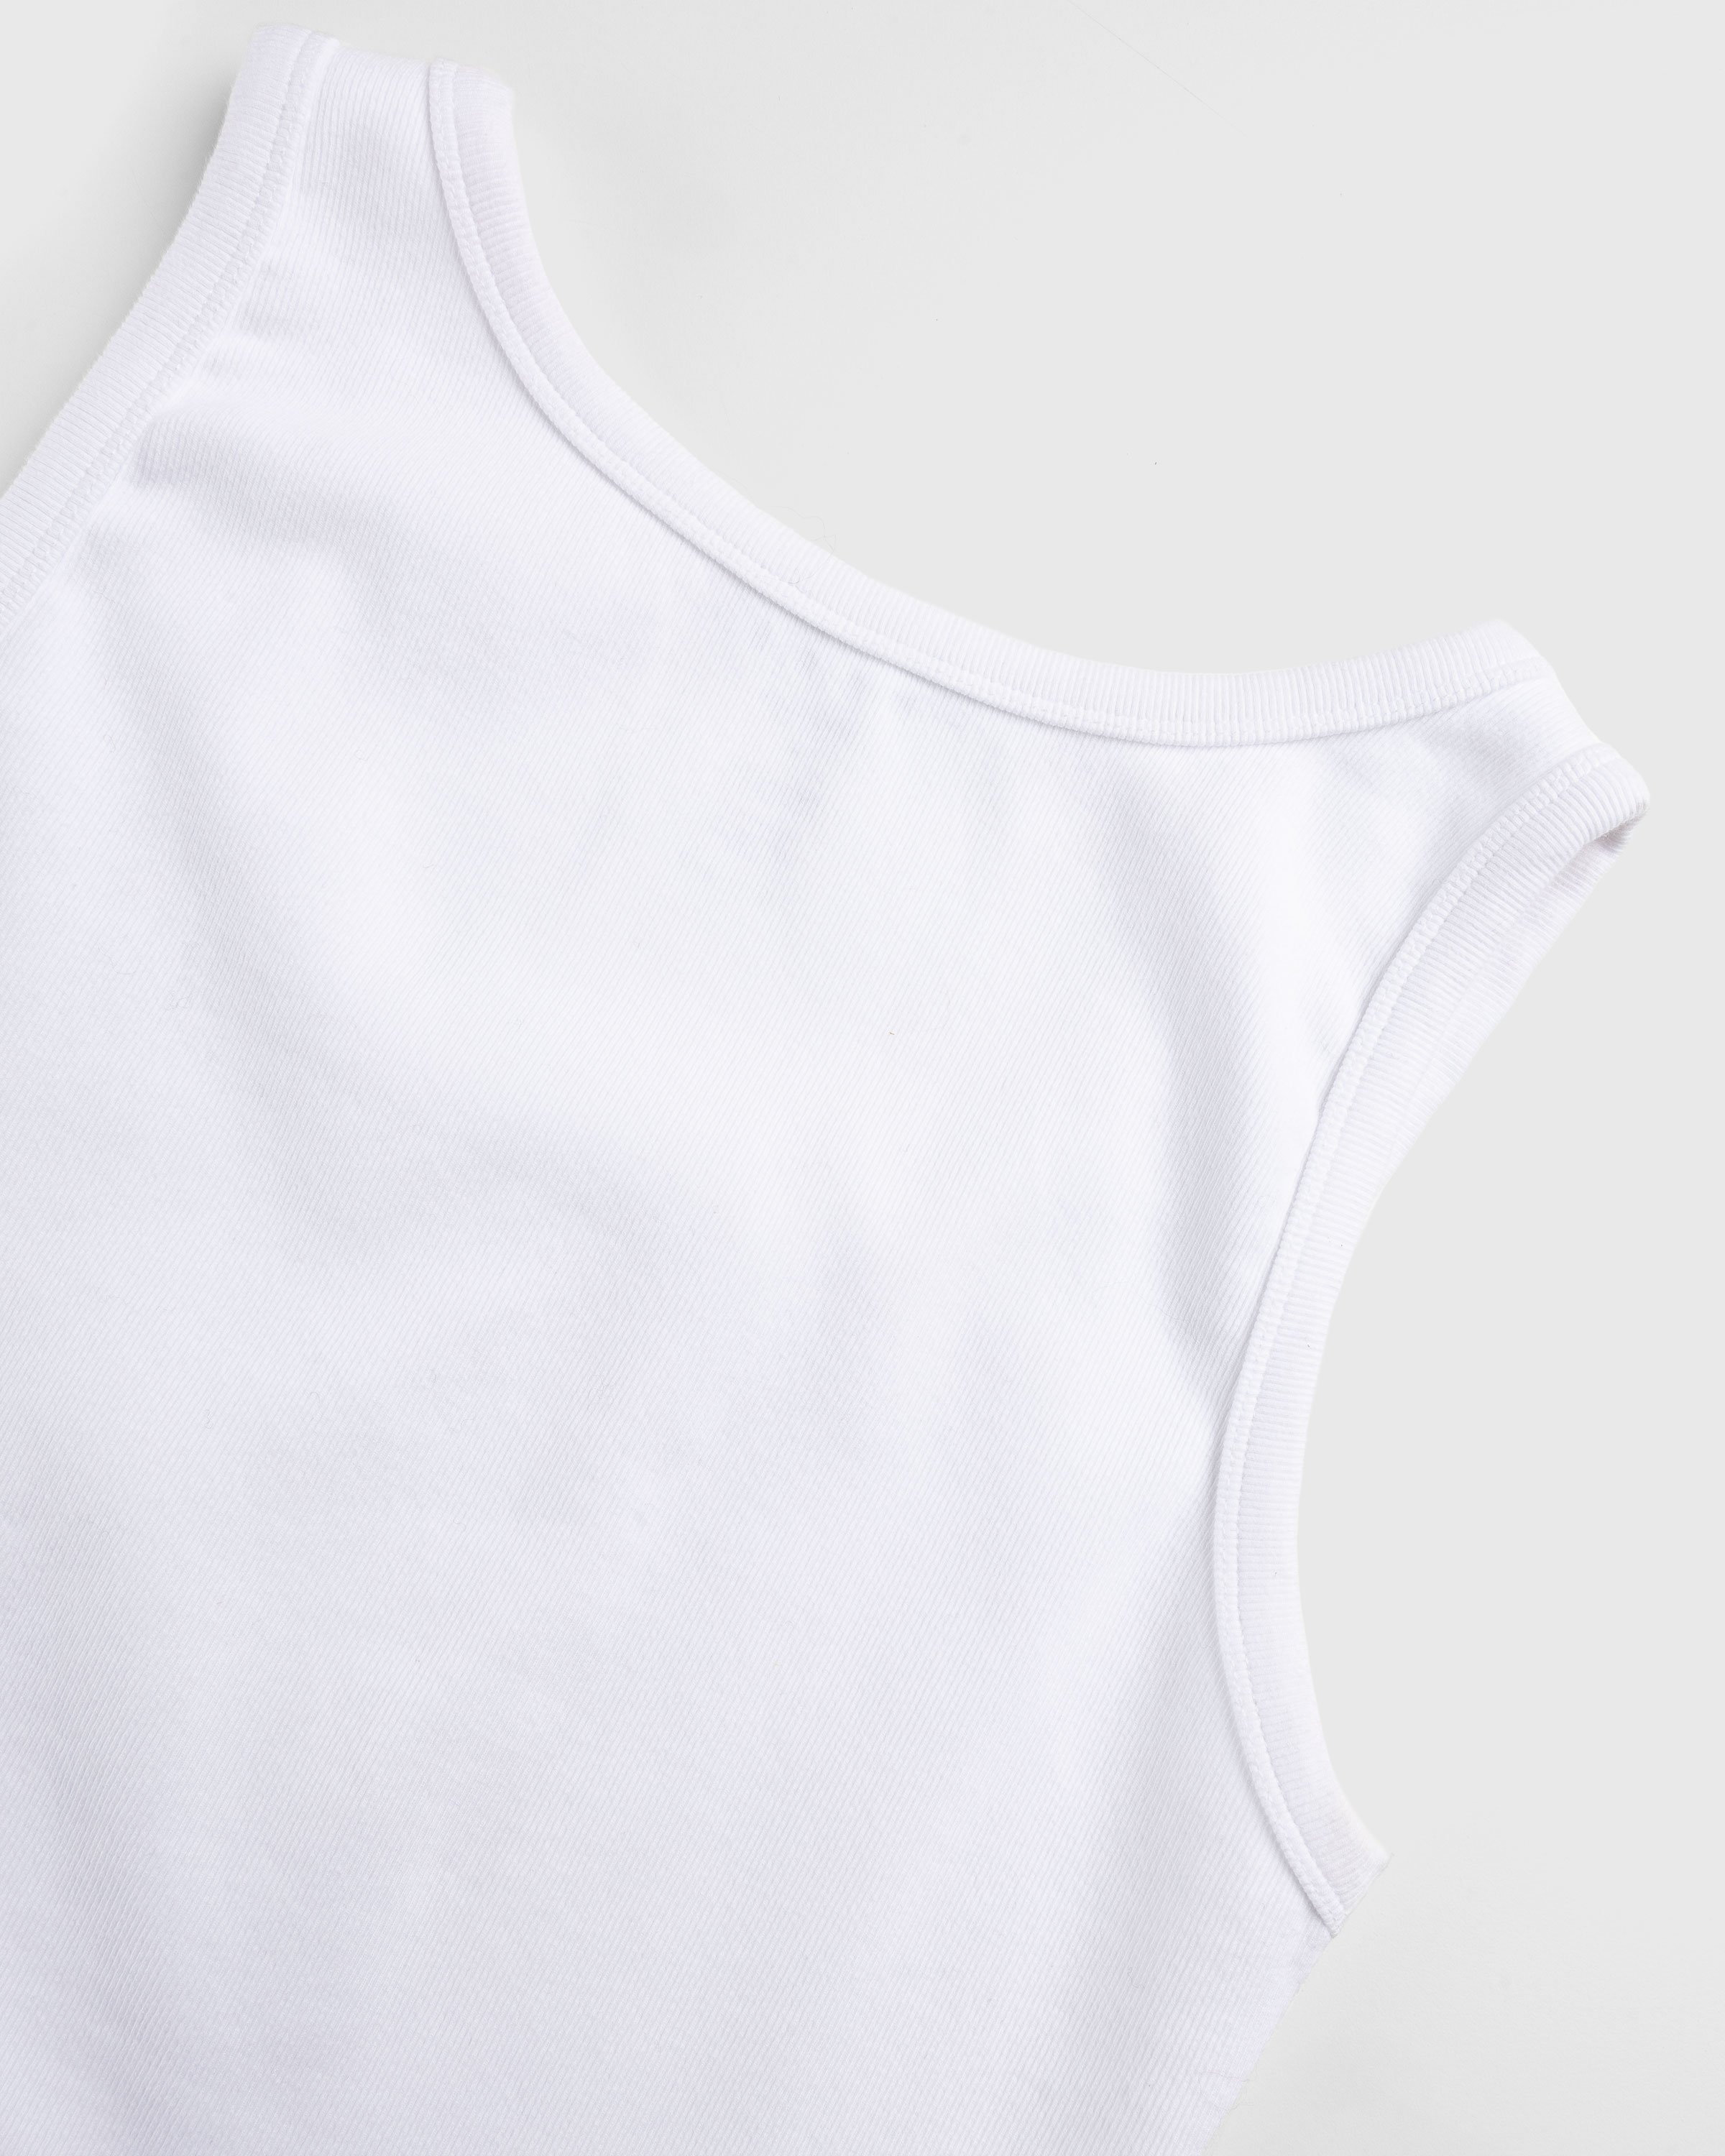 Highsnobiety HS05 - 3 Pack Tank Top White - Clothing - White - Image 7